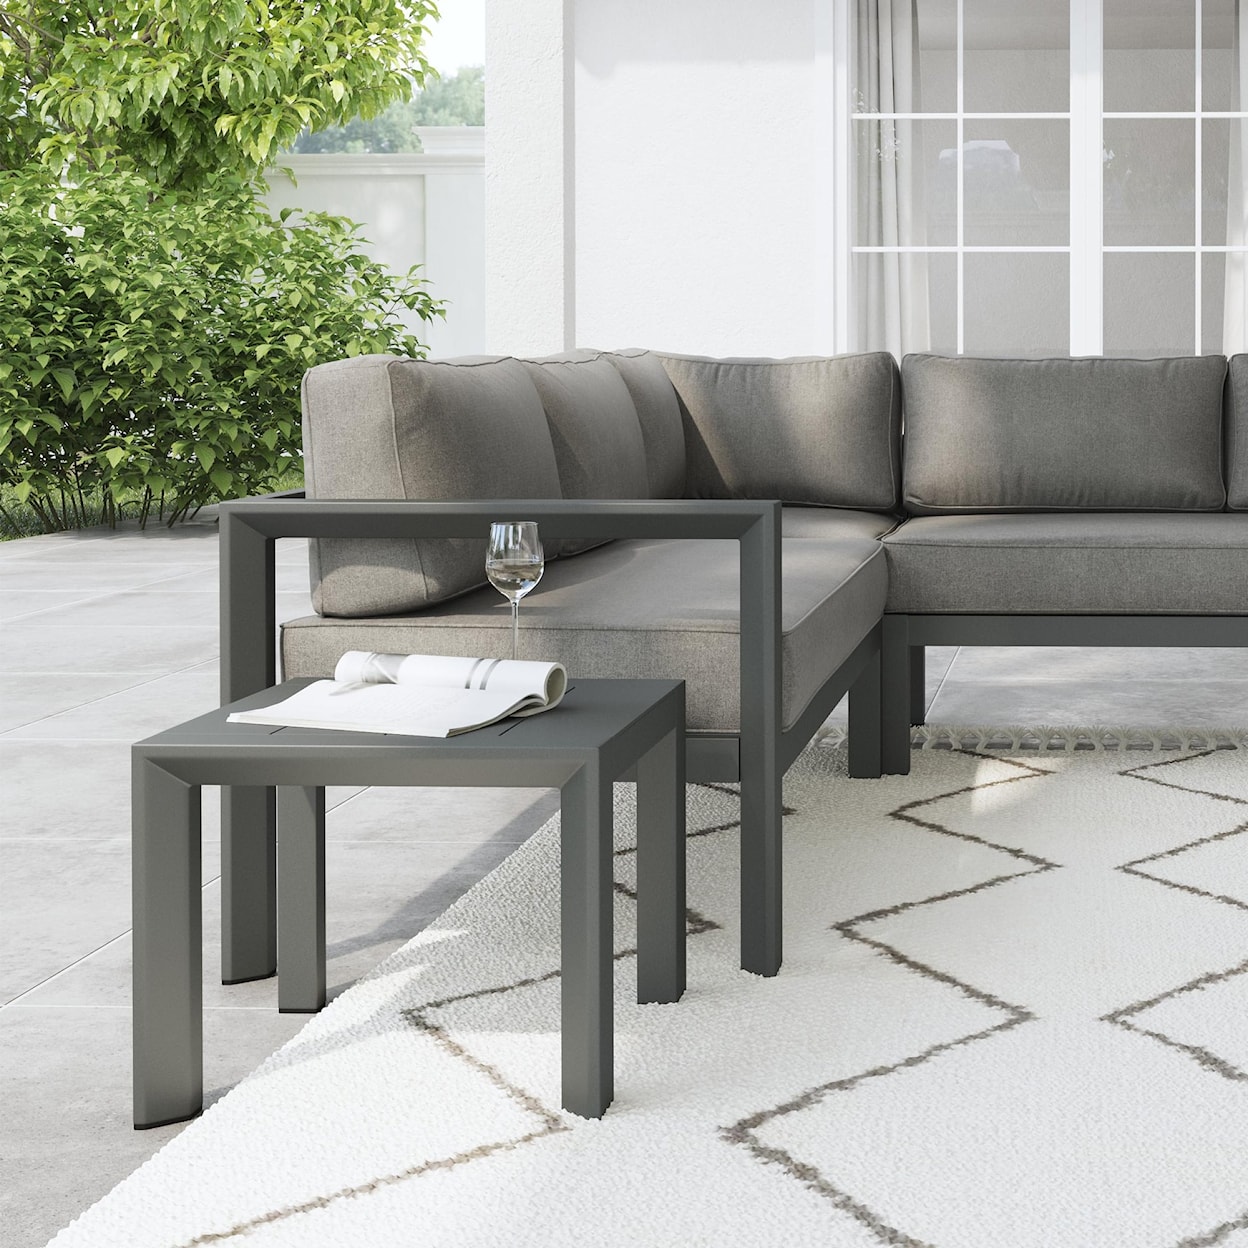 homestyles Grayton Sectional Sofa with End Tables